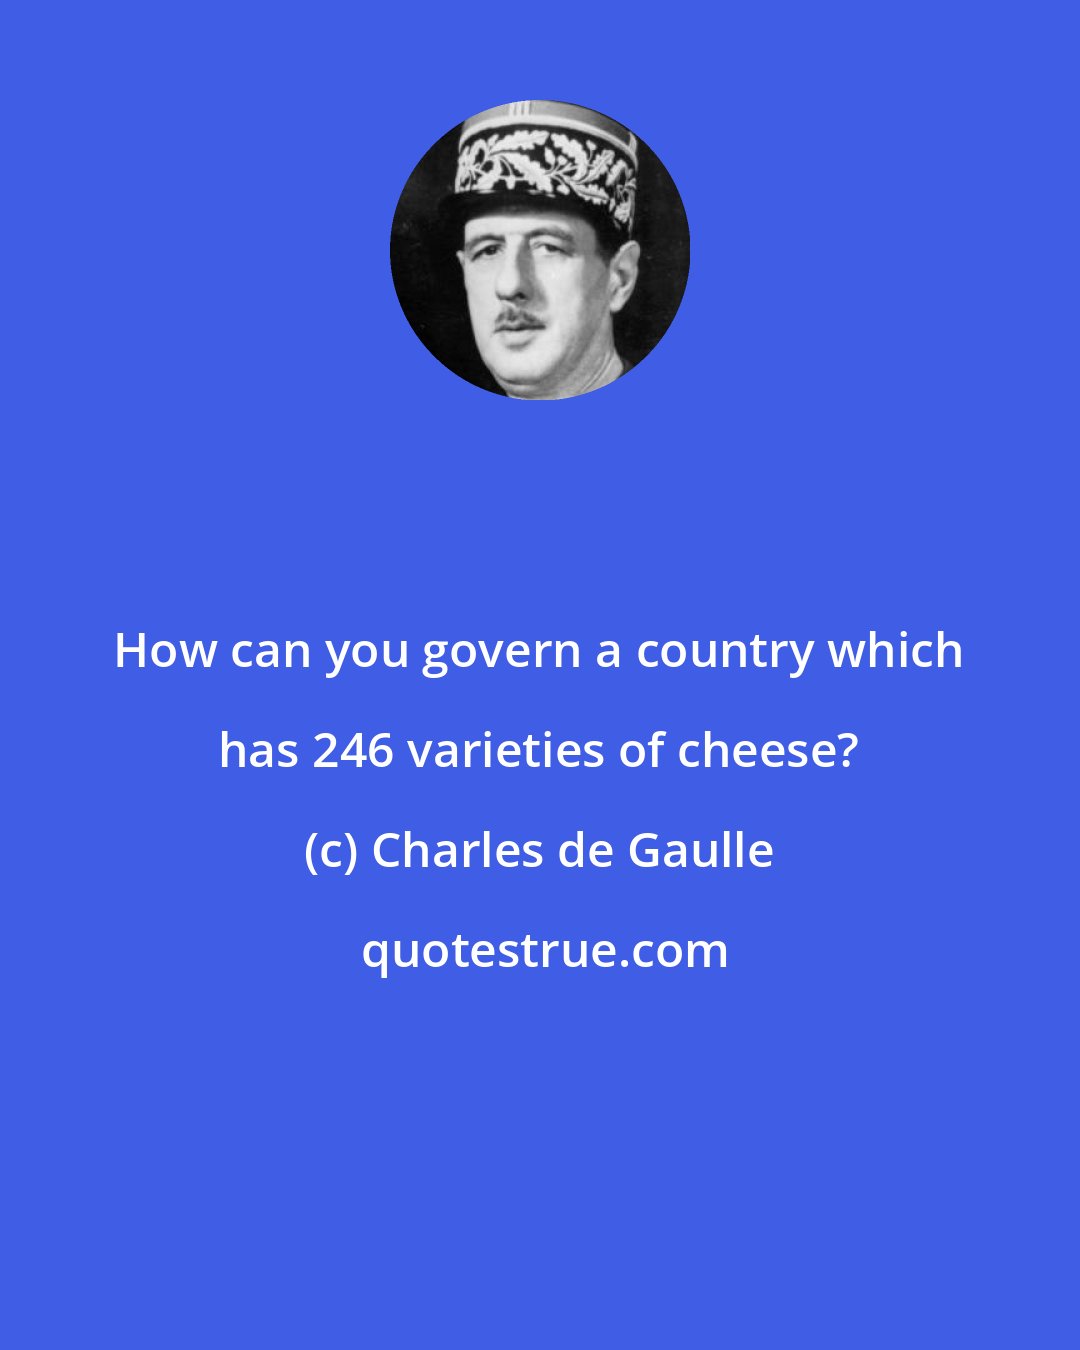 Charles de Gaulle: How can you govern a country which has 246 varieties of cheese?